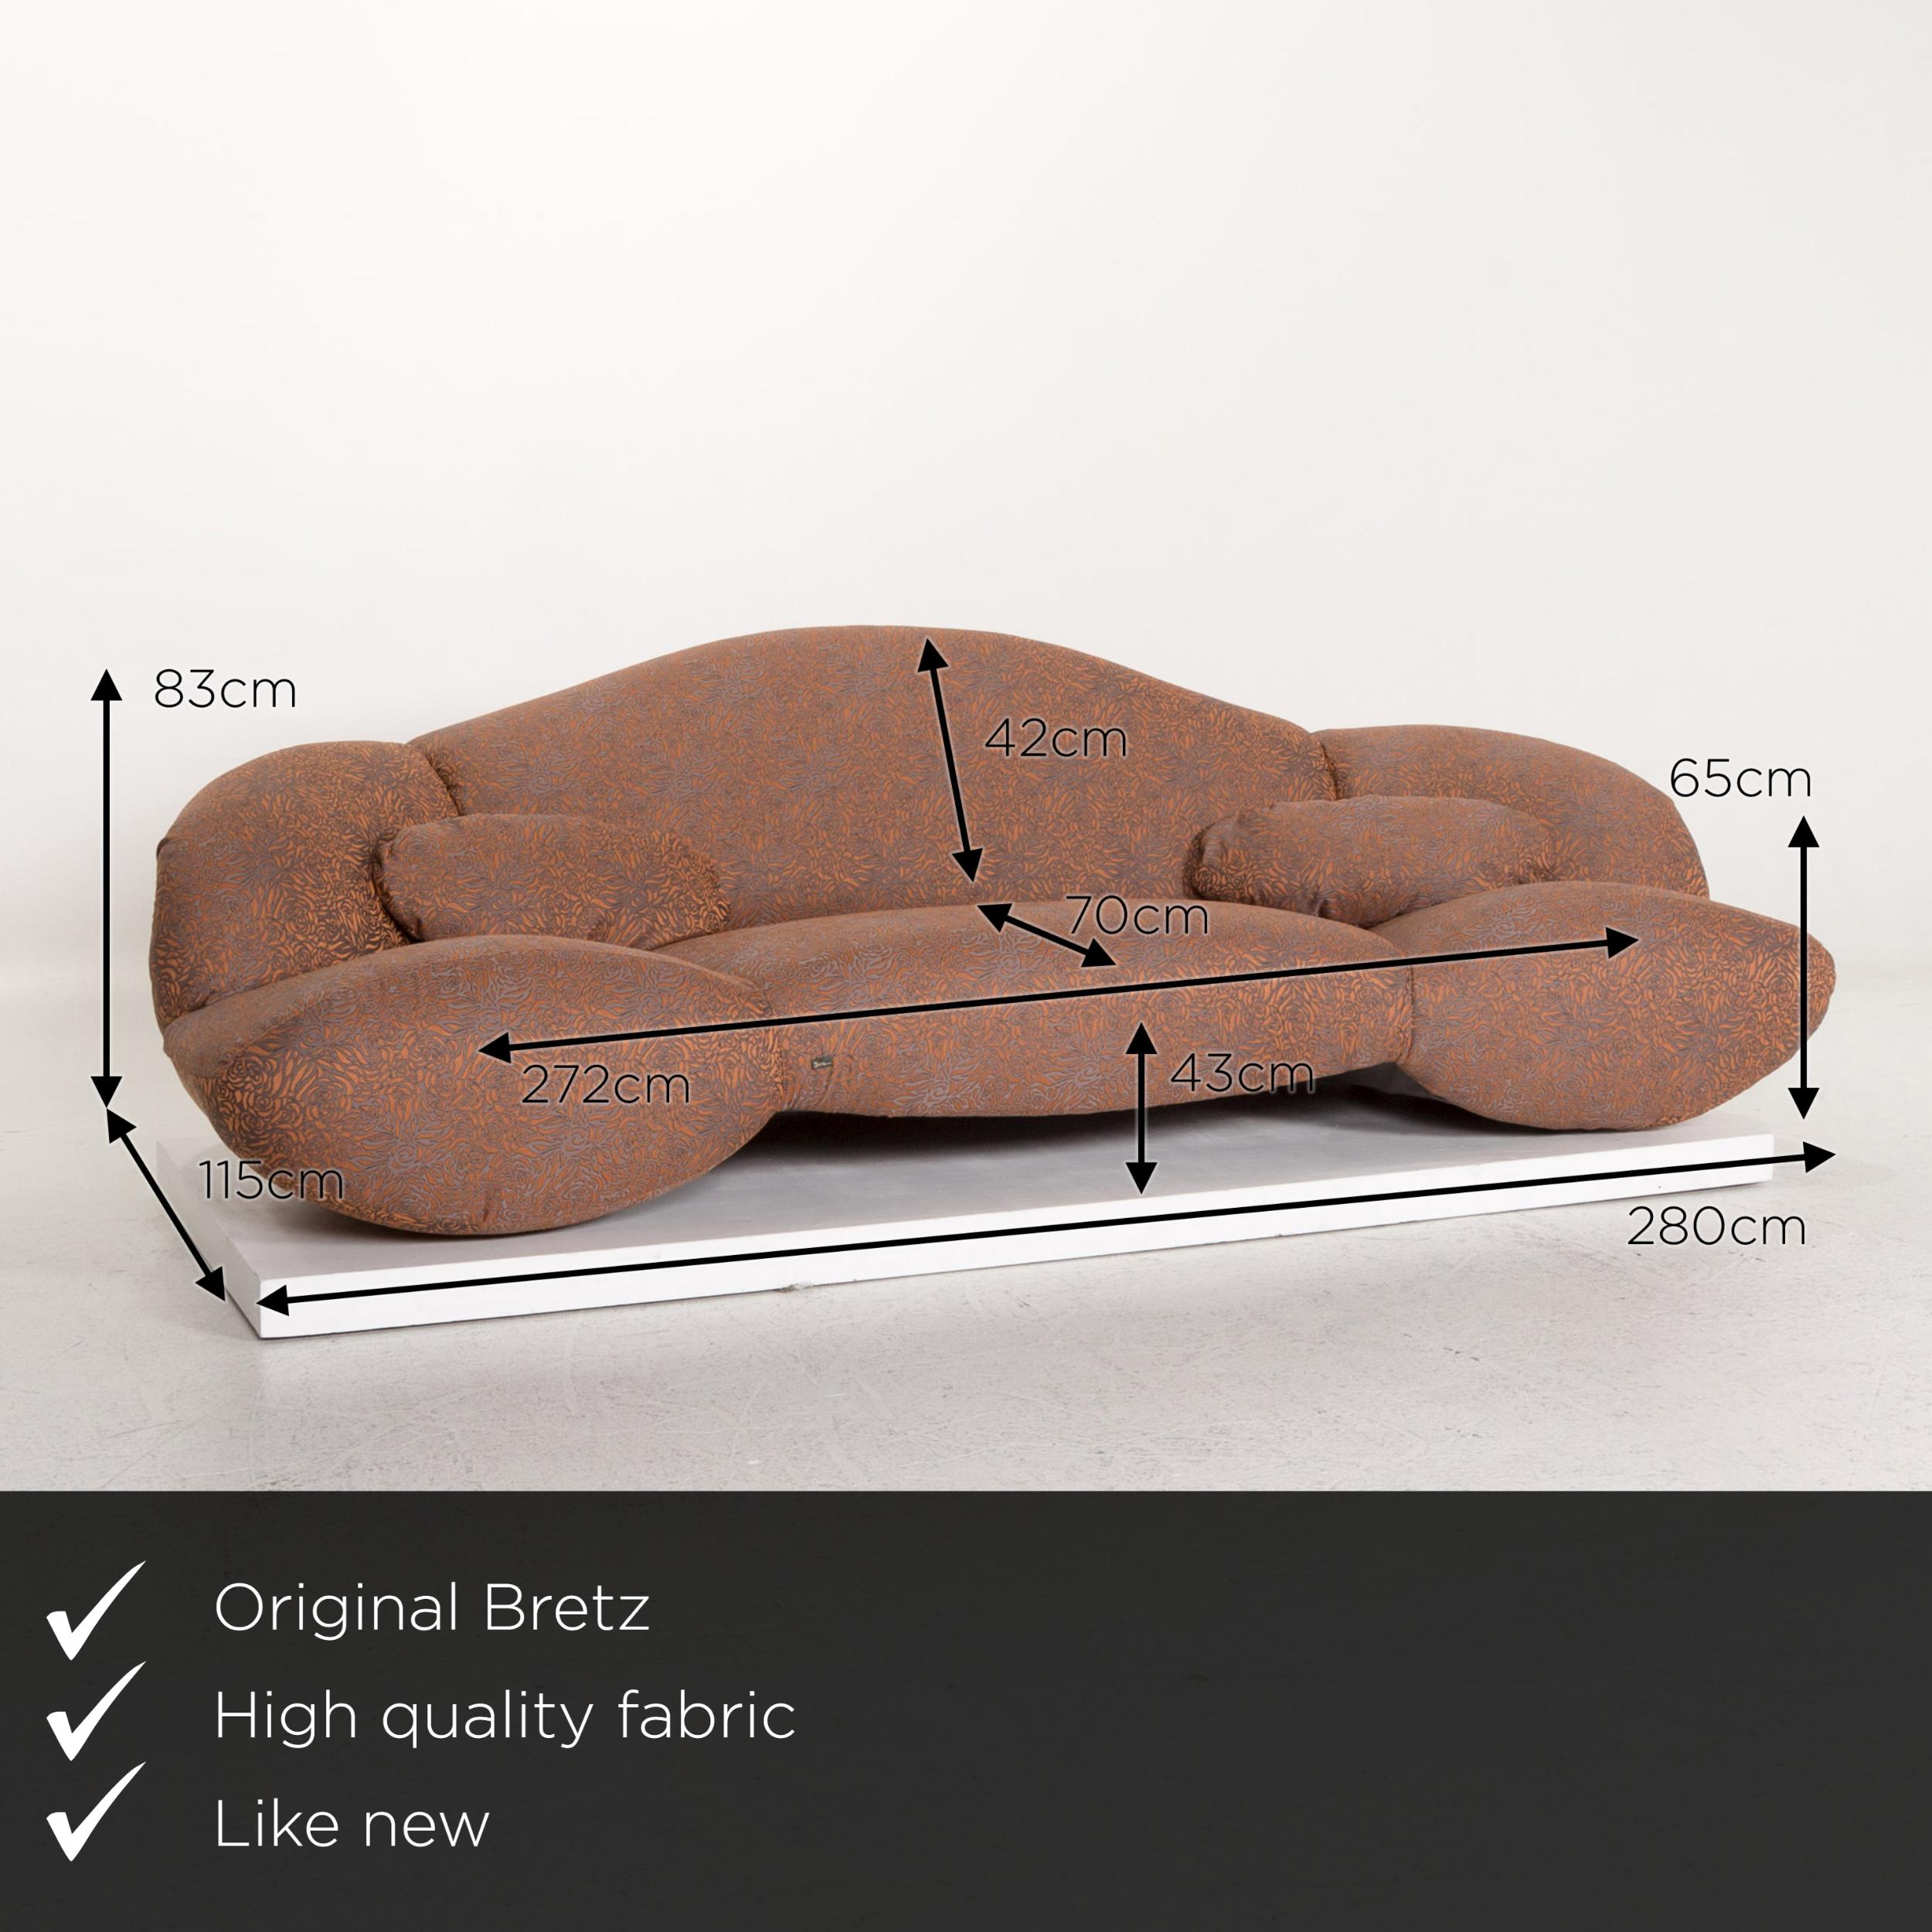 We present to you a Bretz Mumba designer fabric sofa four-seat couch.

Product measurements in centimeters:

Depth 115
Width 280
Height 83
Seat height 43
Rest height 65
Seat depth 70
Seat width 272
Back height 42.


   